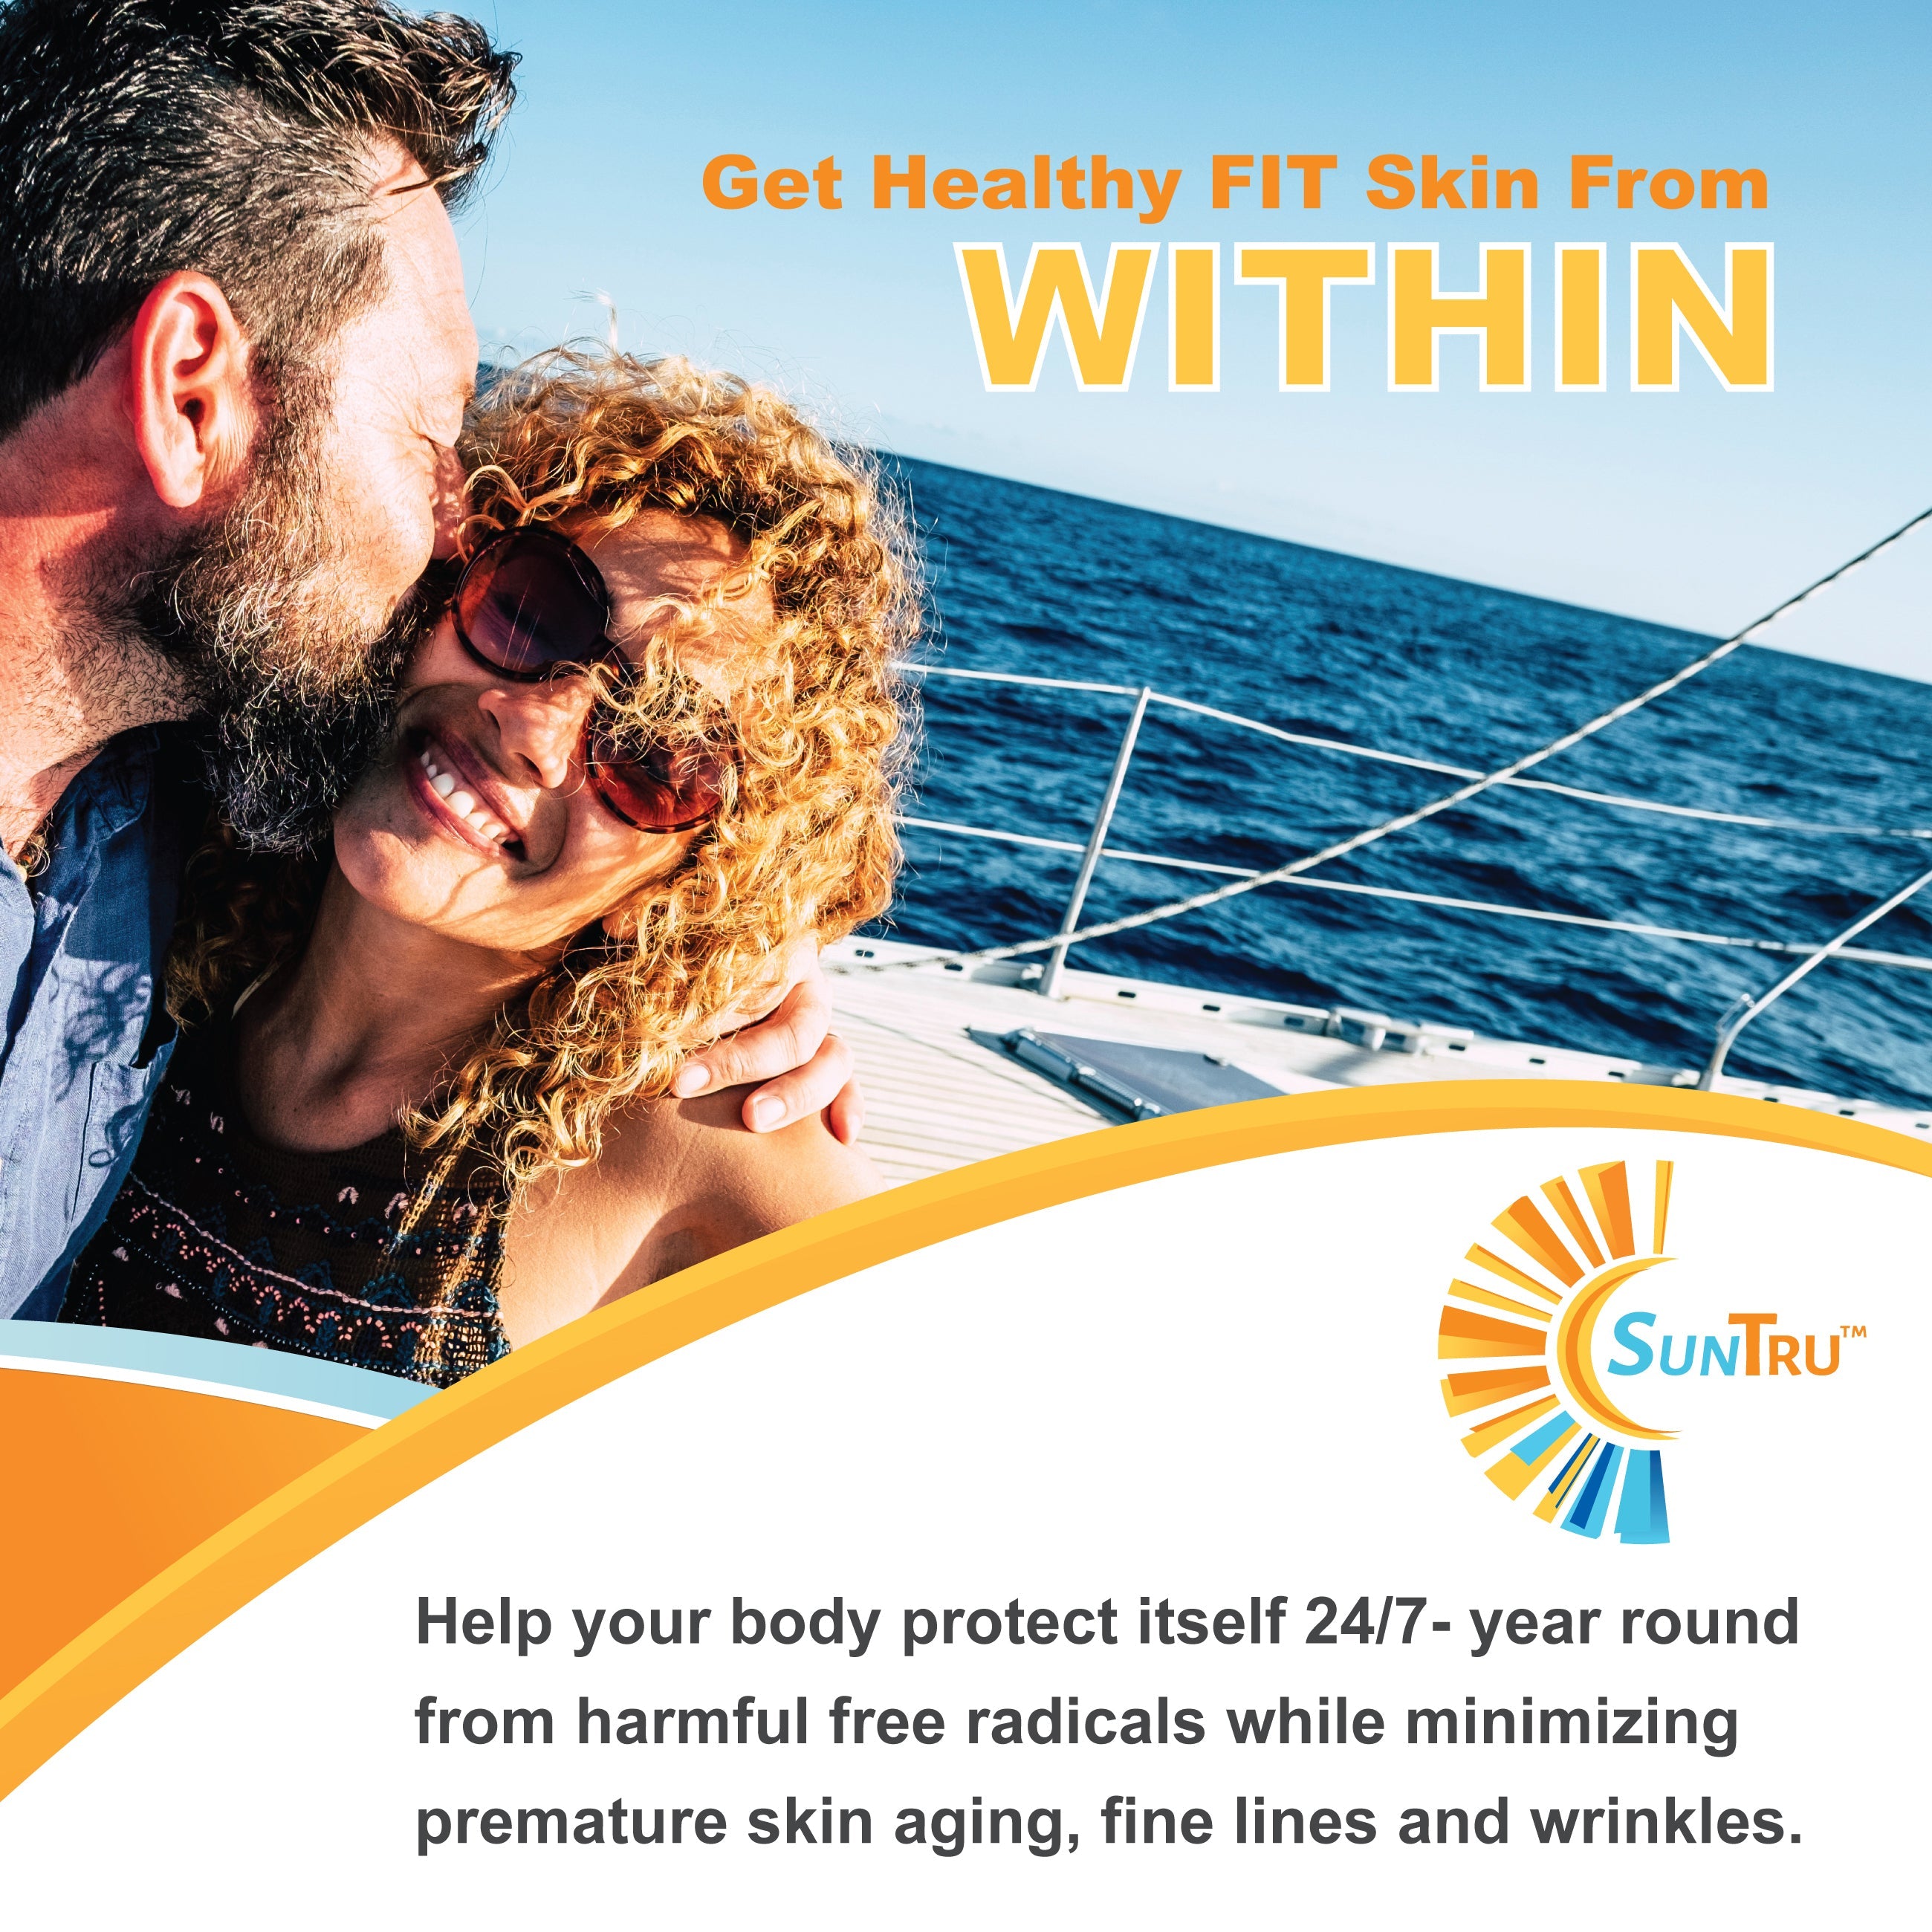 A man snuggle kissing a smiling woman with sun glasses. They are in the sun on a sailboat in the ocean. There is a SunTru logo. Headline text - Get Healthy FIT Skin From WITHIN Body Text - Help your body protect itself 24/7 - year round from harmful free radicals while minimizing premature skin aging, fine lines and wrinkles. SunTru logo is in right corner.